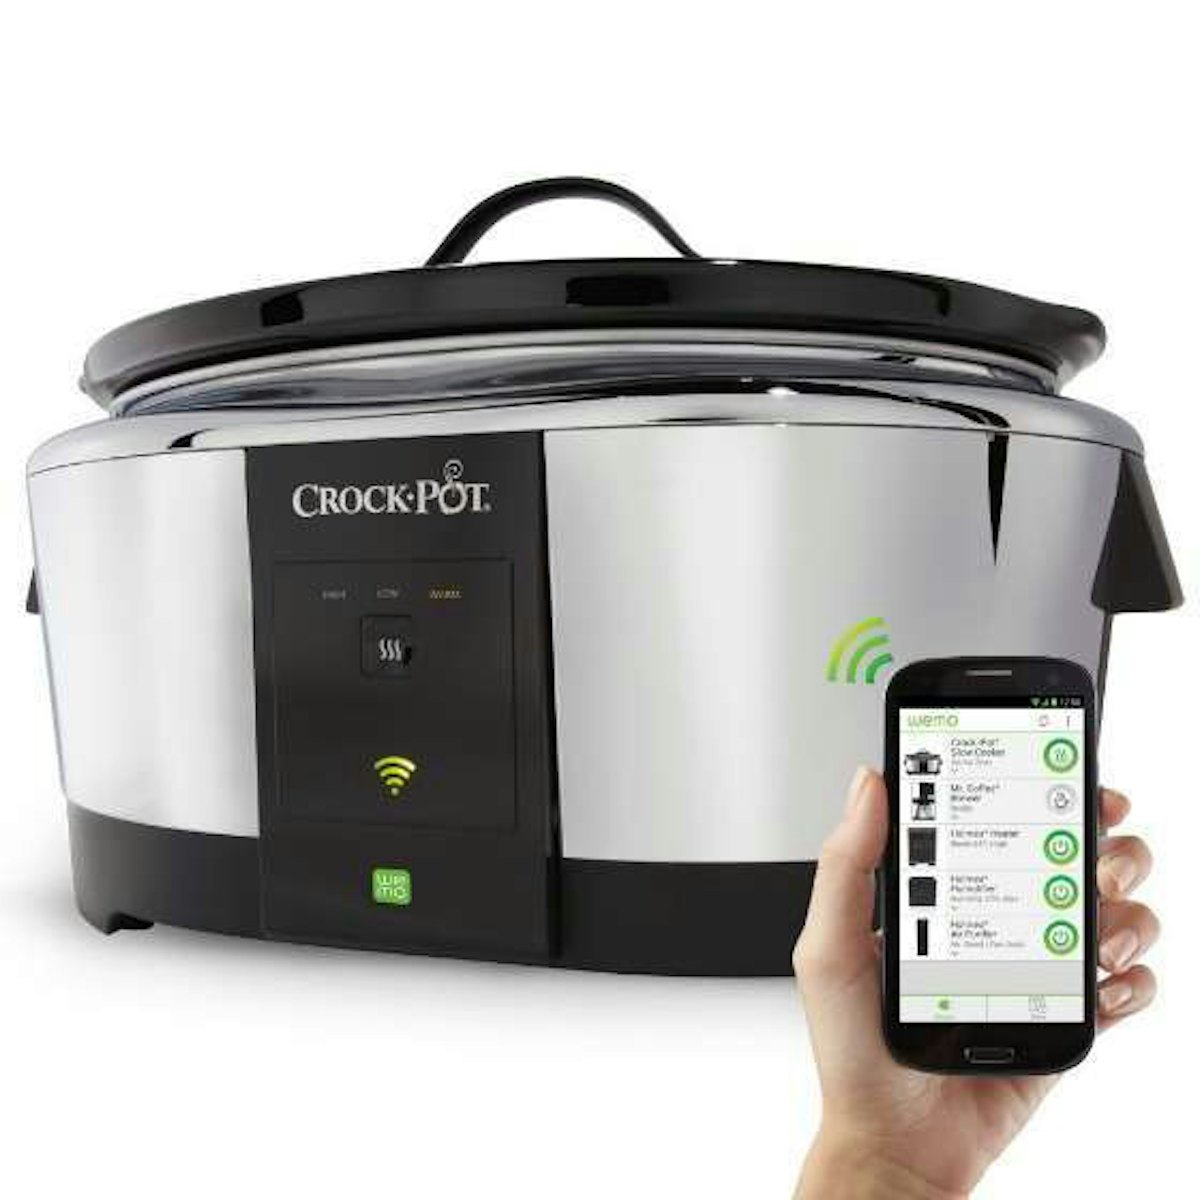 Belkin's Smartphone-Controlled Crock-Pot Doesn't Dish Enough Features - Vox